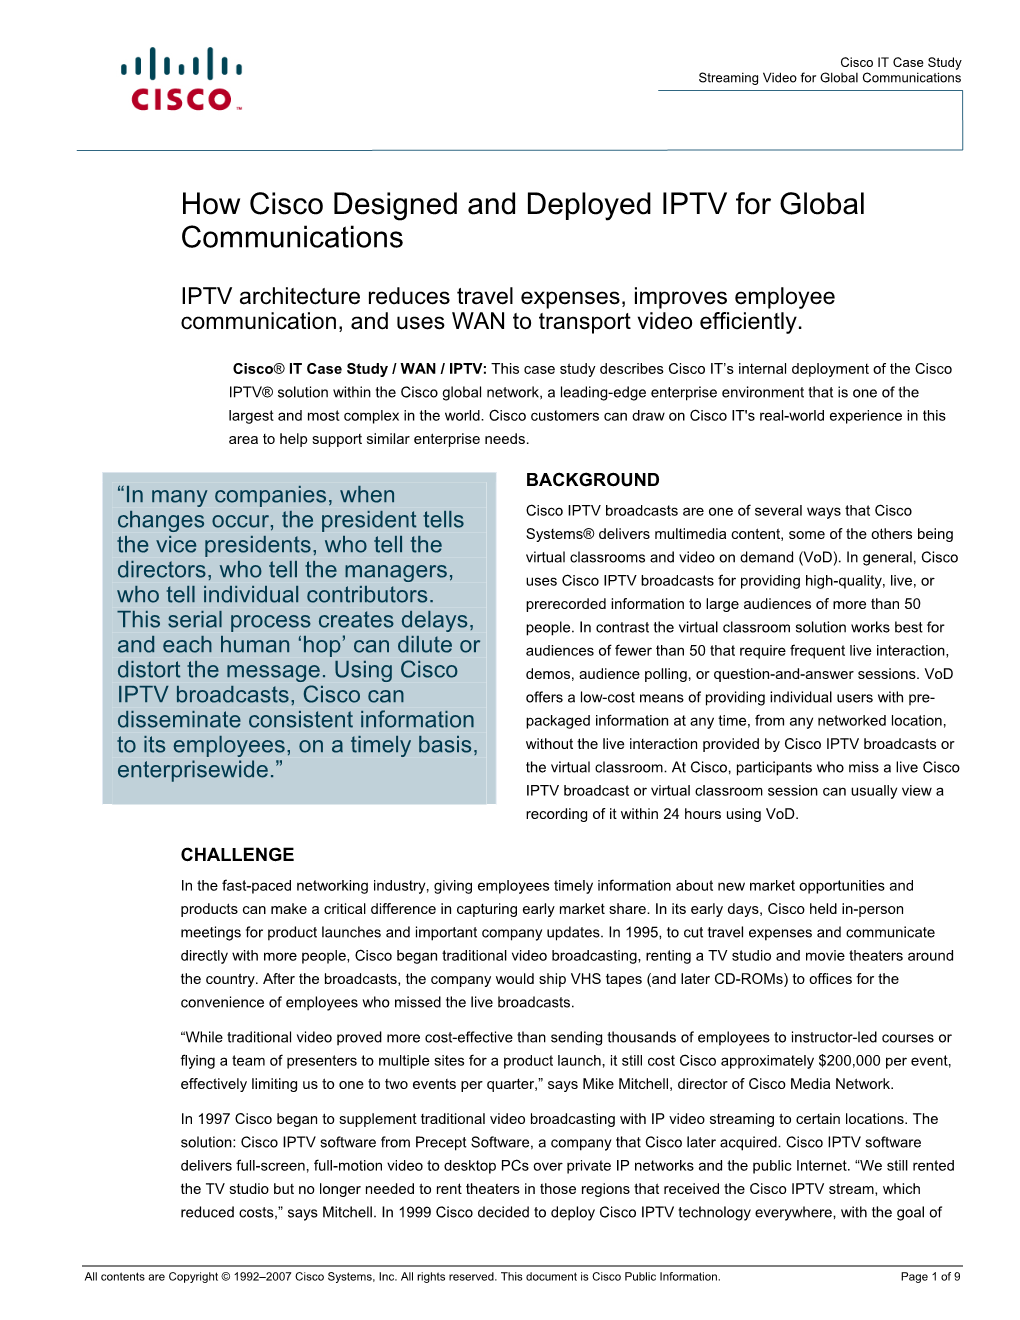 How Cisco Designed and Deployed IPTV for Global Communications